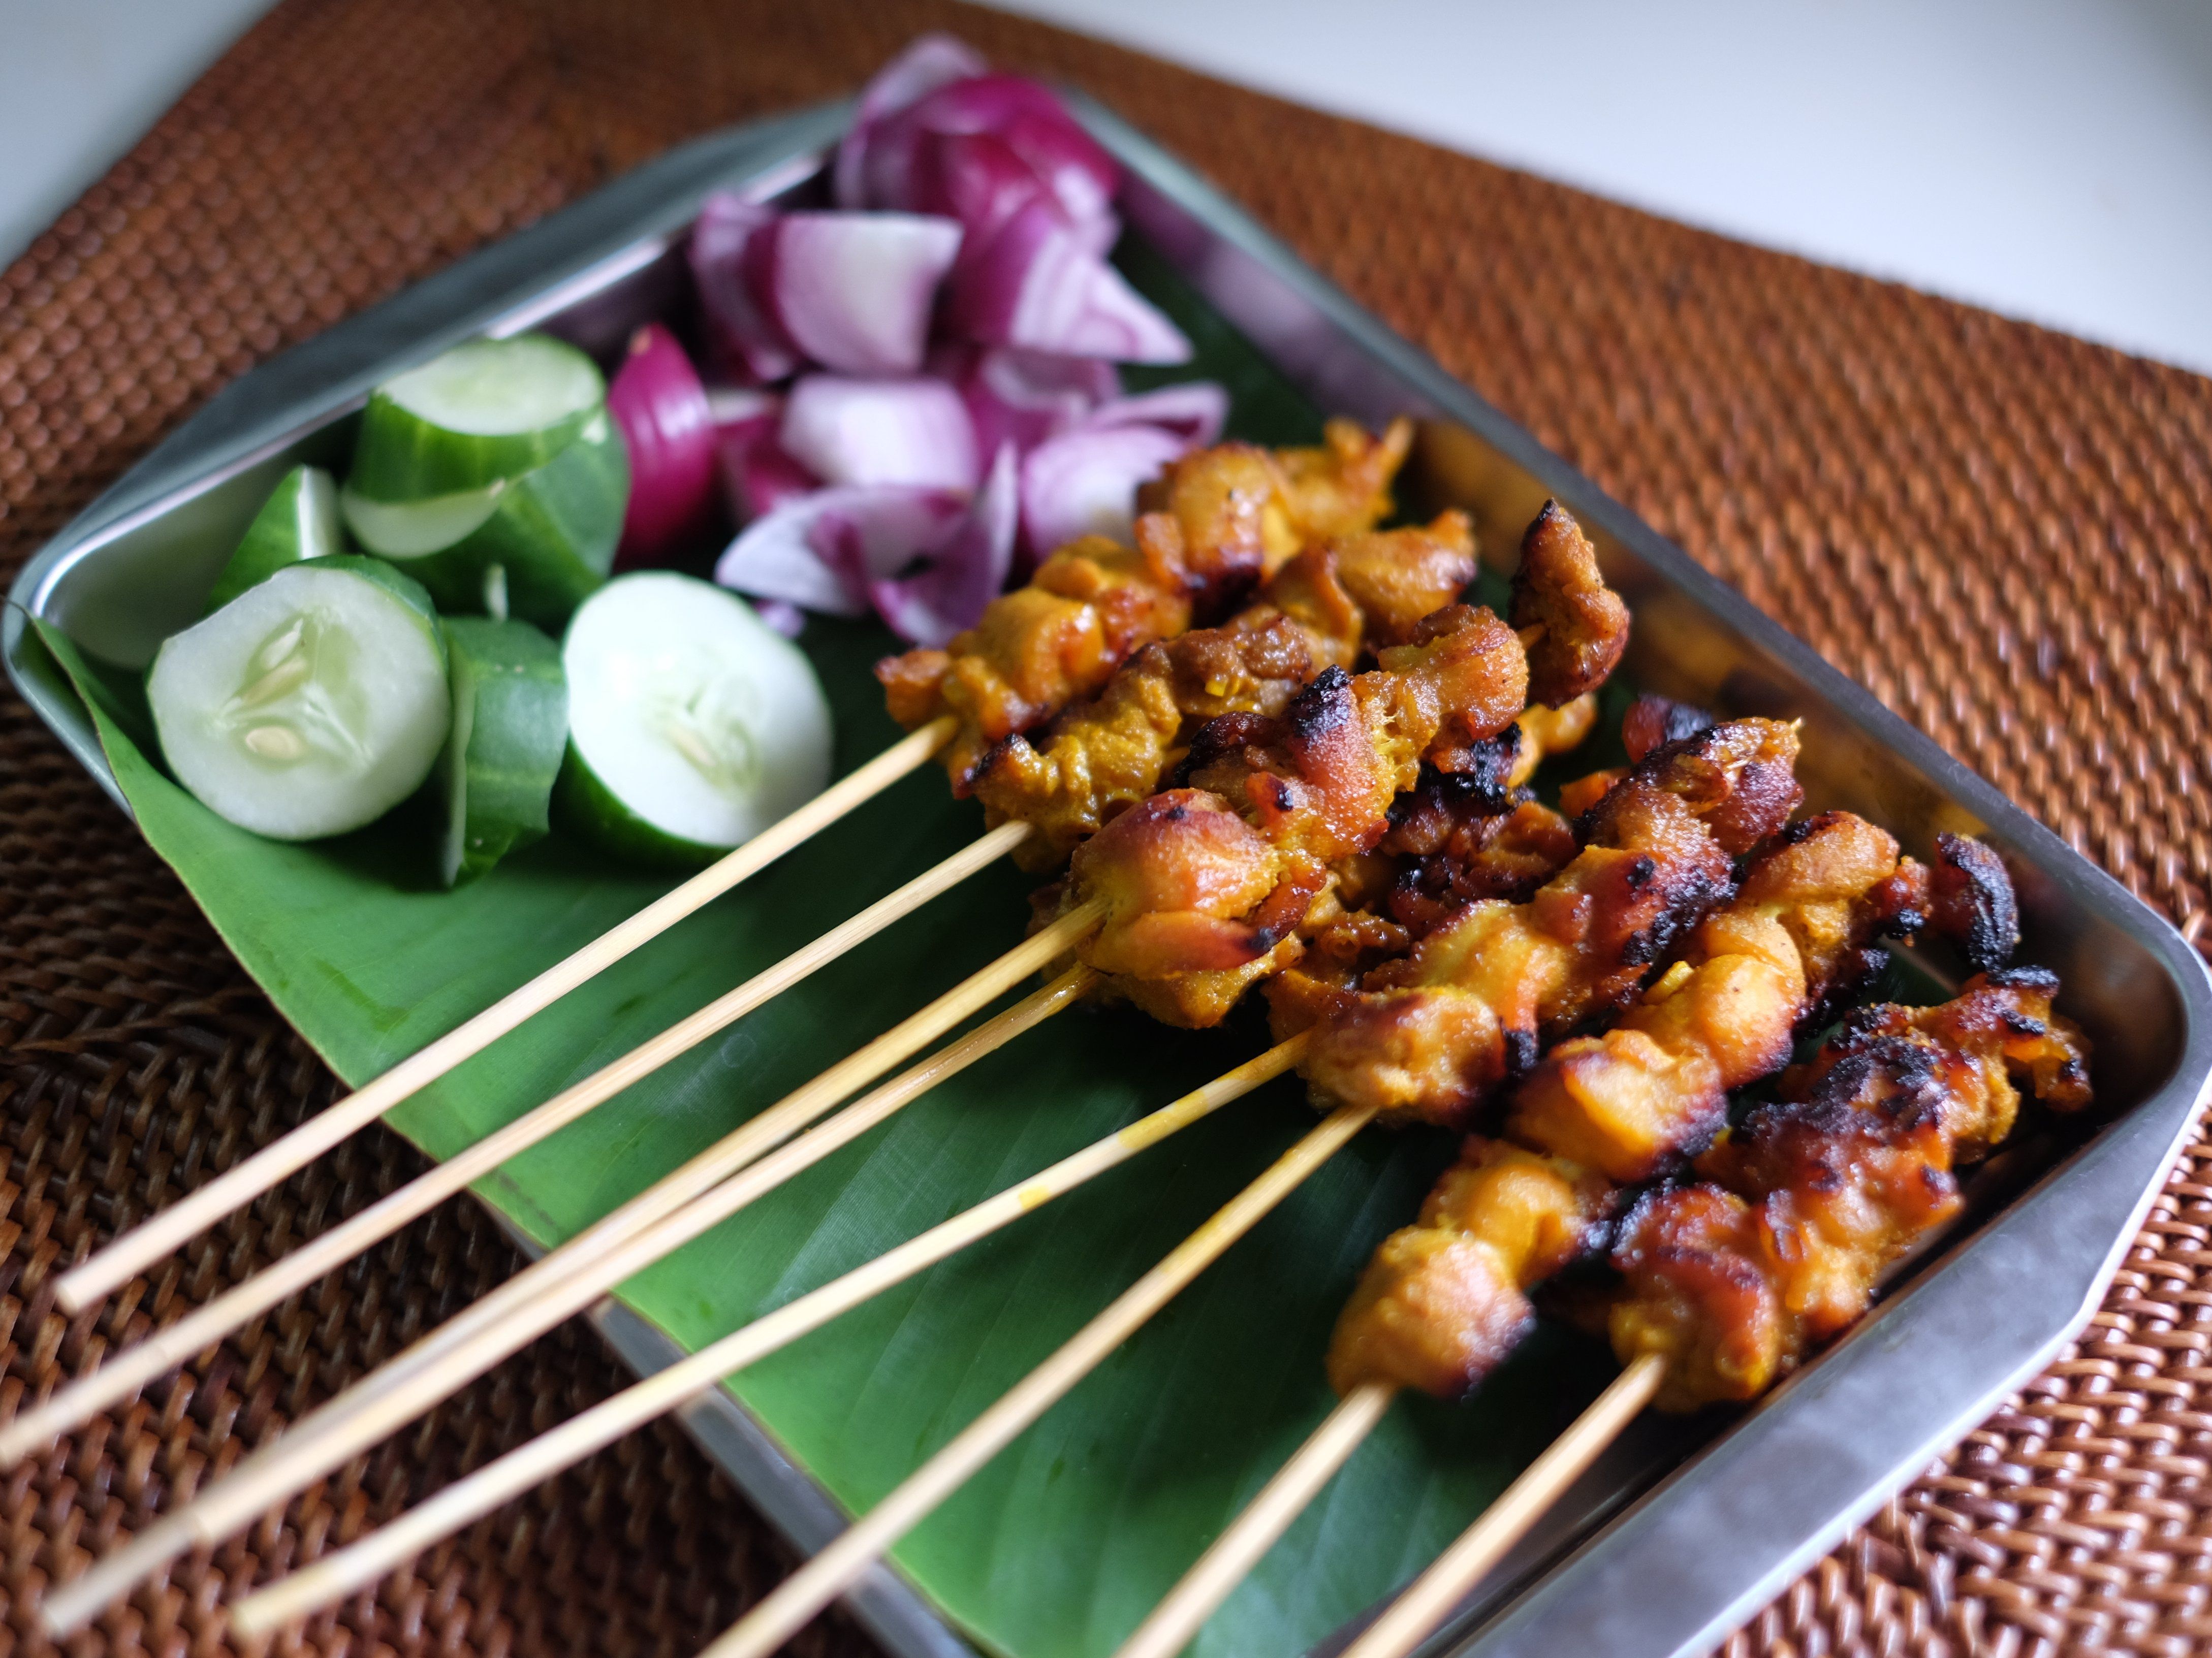 New Malaysian Kitchen: Choose Your Own Malaysian Cuisine with Organic